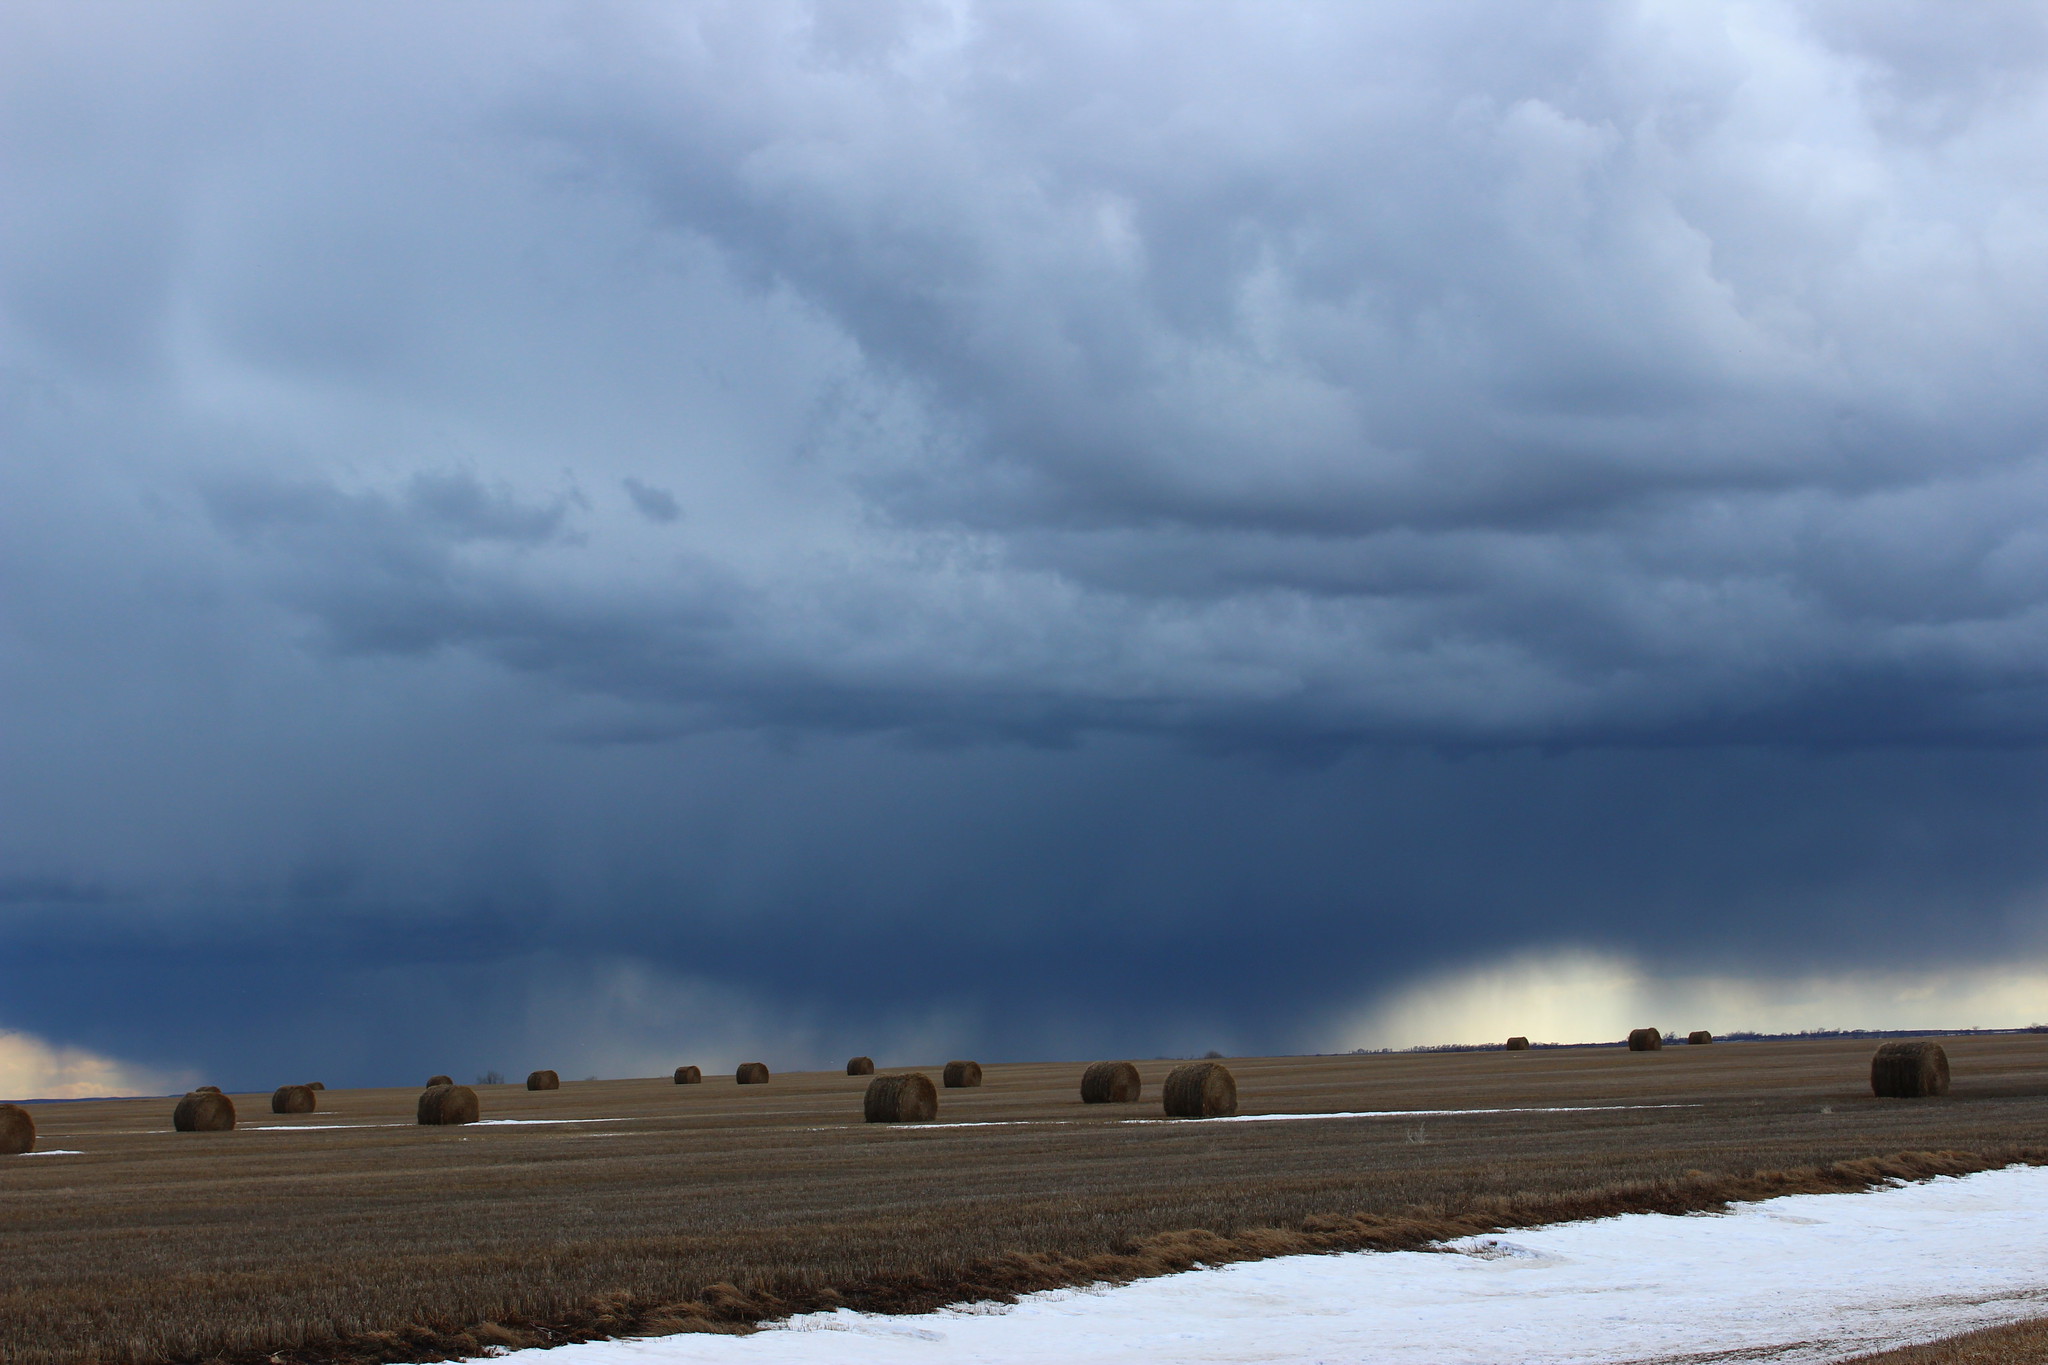 Rain shower over a field with several hay bales throughout. Courtesy: Krista Lundgren, USFWS